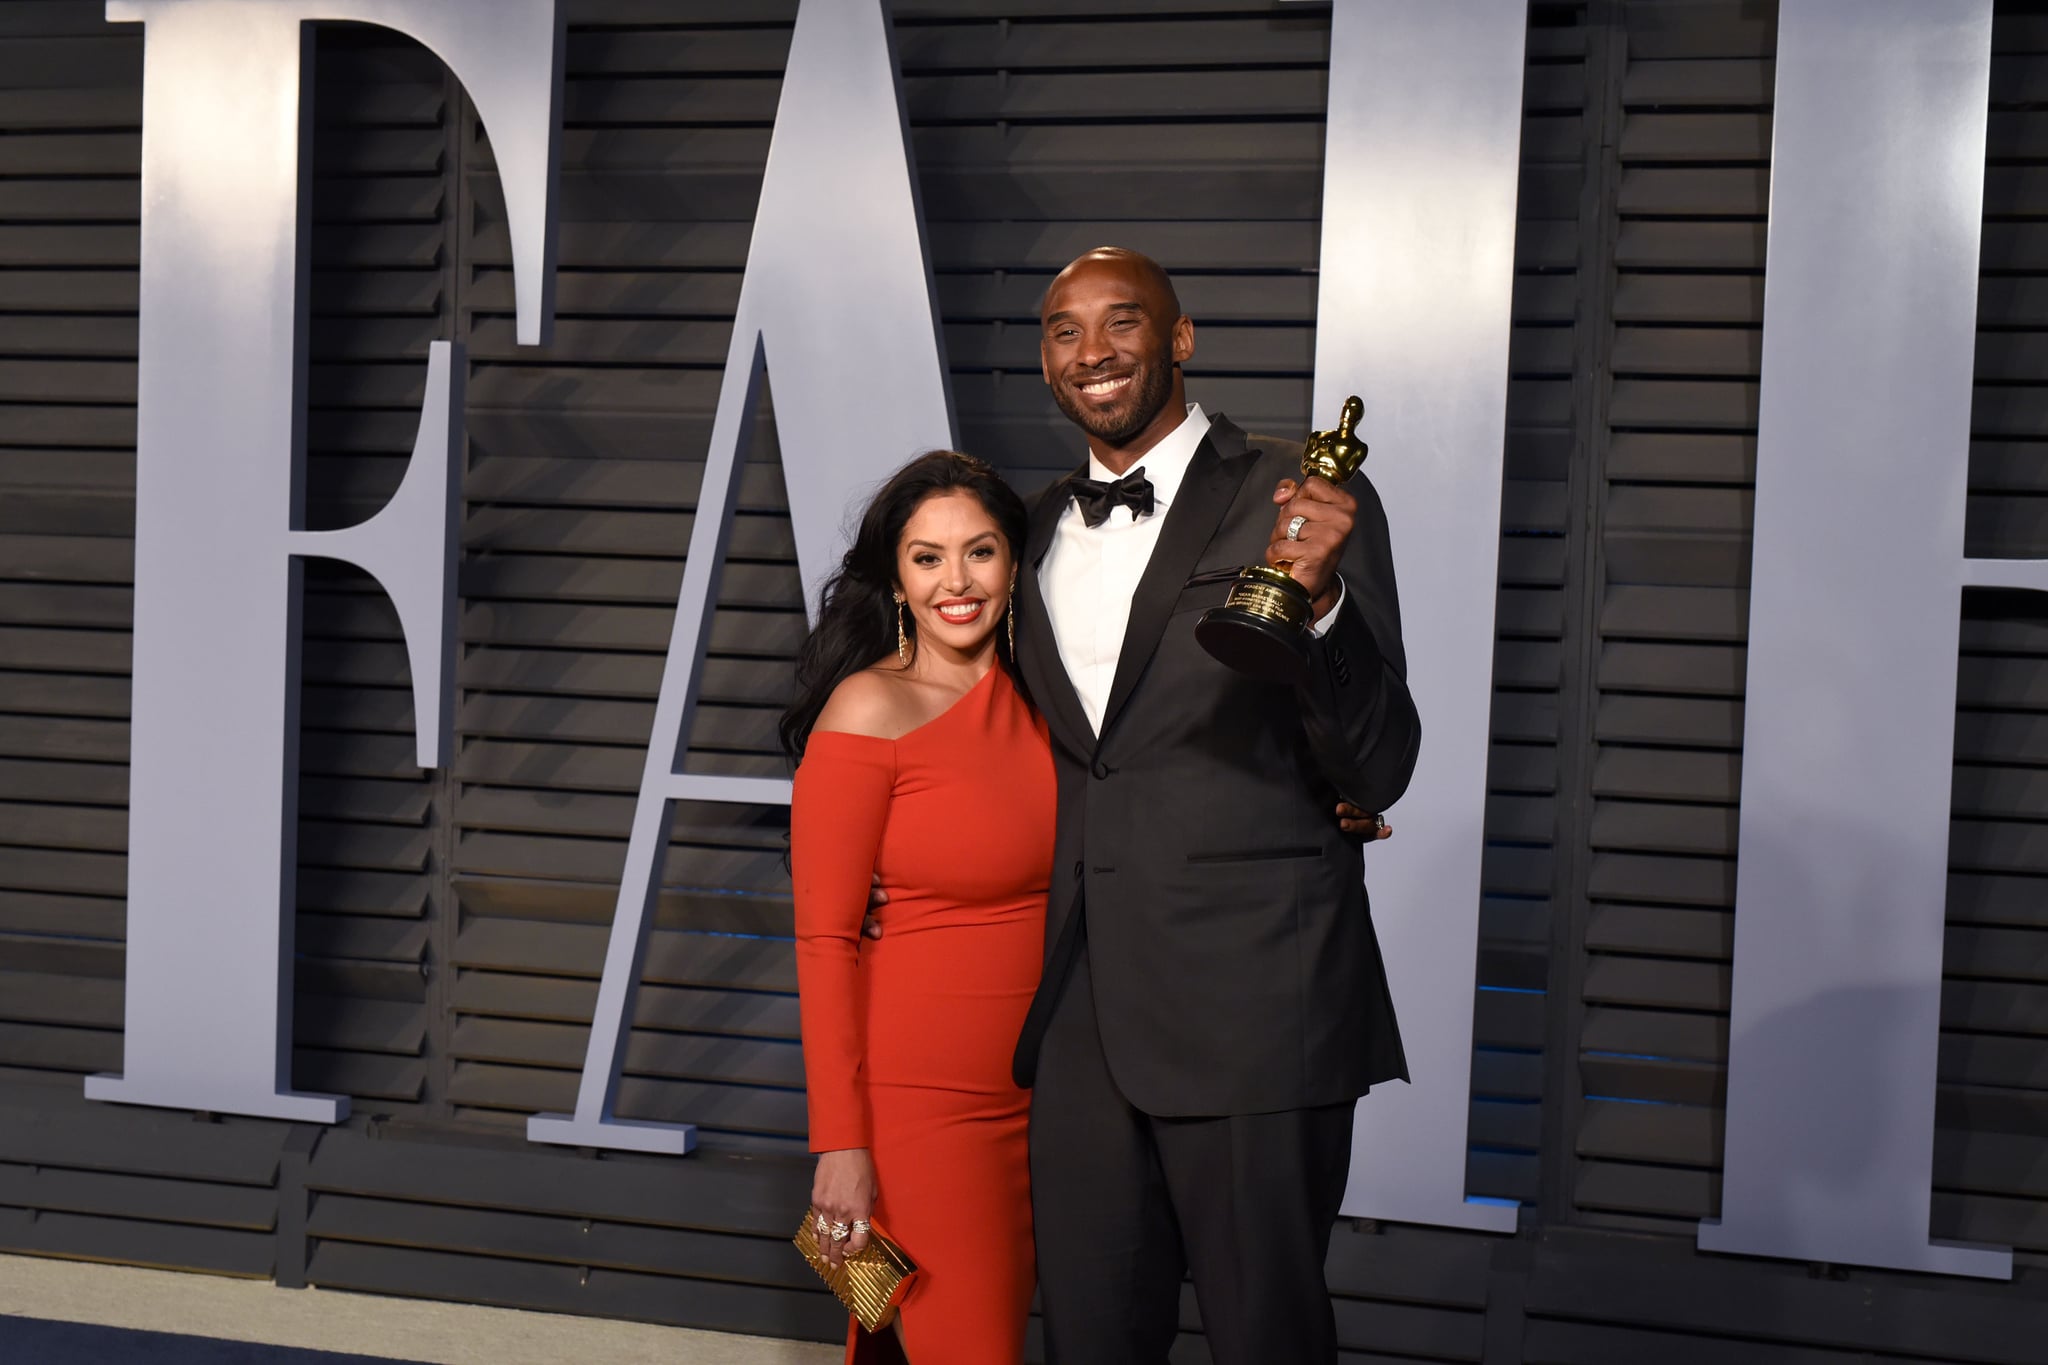 BEVERLY HILLS, CA - MARCH 4: Vanessa Bryant and Kobe Bryant attend 2018 Vanity Fair Oscar Party Hosted By Radhika Jones - Arrivals at Wallis Annenberg Center for the Performing Arts on March 4, 2018 in Beverly Hills, CA. (Photo by Presley Ann/Patrick McMullan via Getty Images) *** Local Caption *** Vanessa Bryant;Kobe Bryant